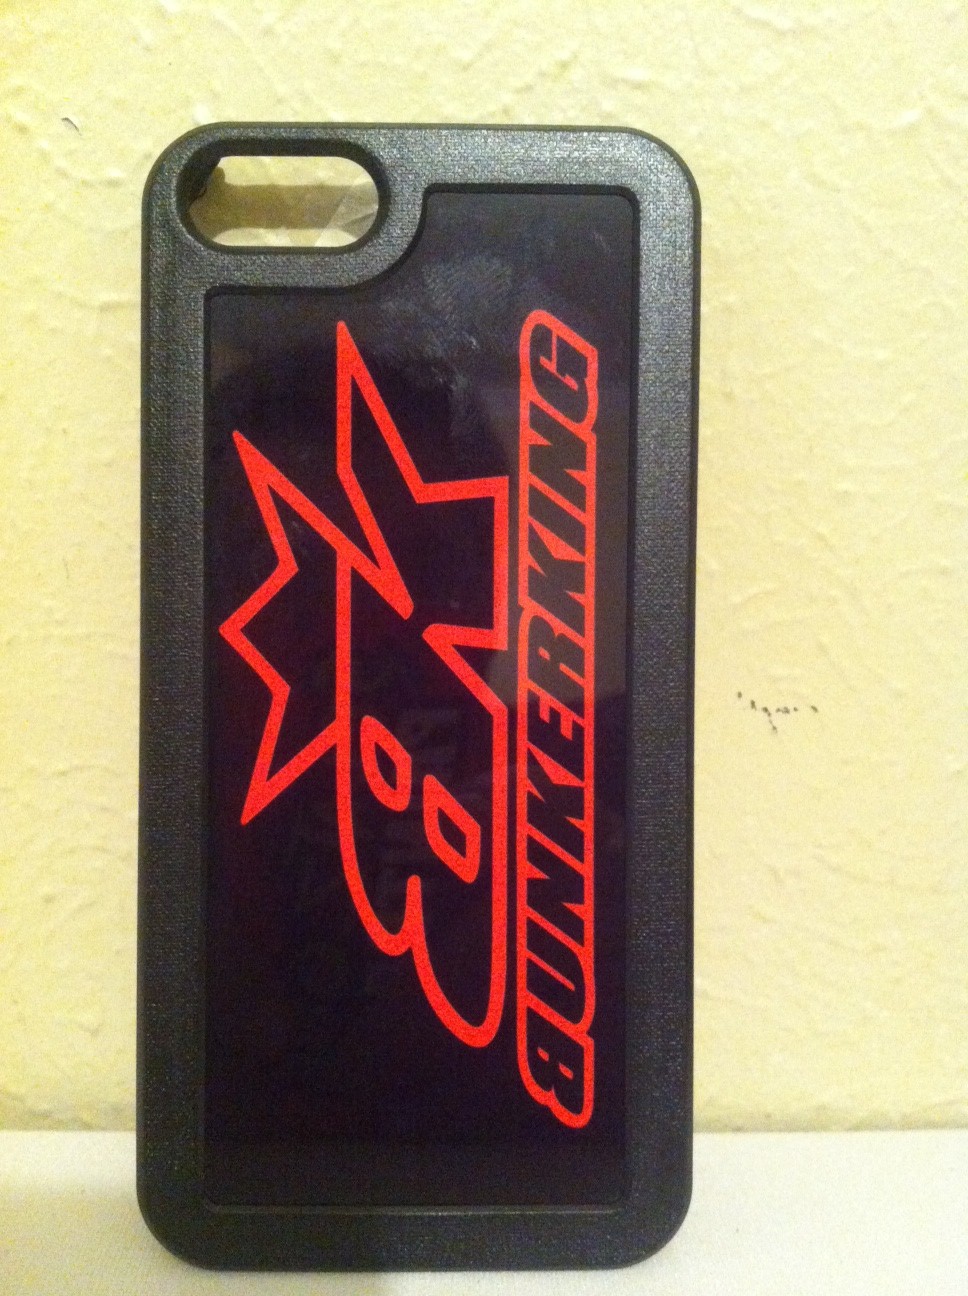 Bunker King Iphone 5 Case made with sublimation printing